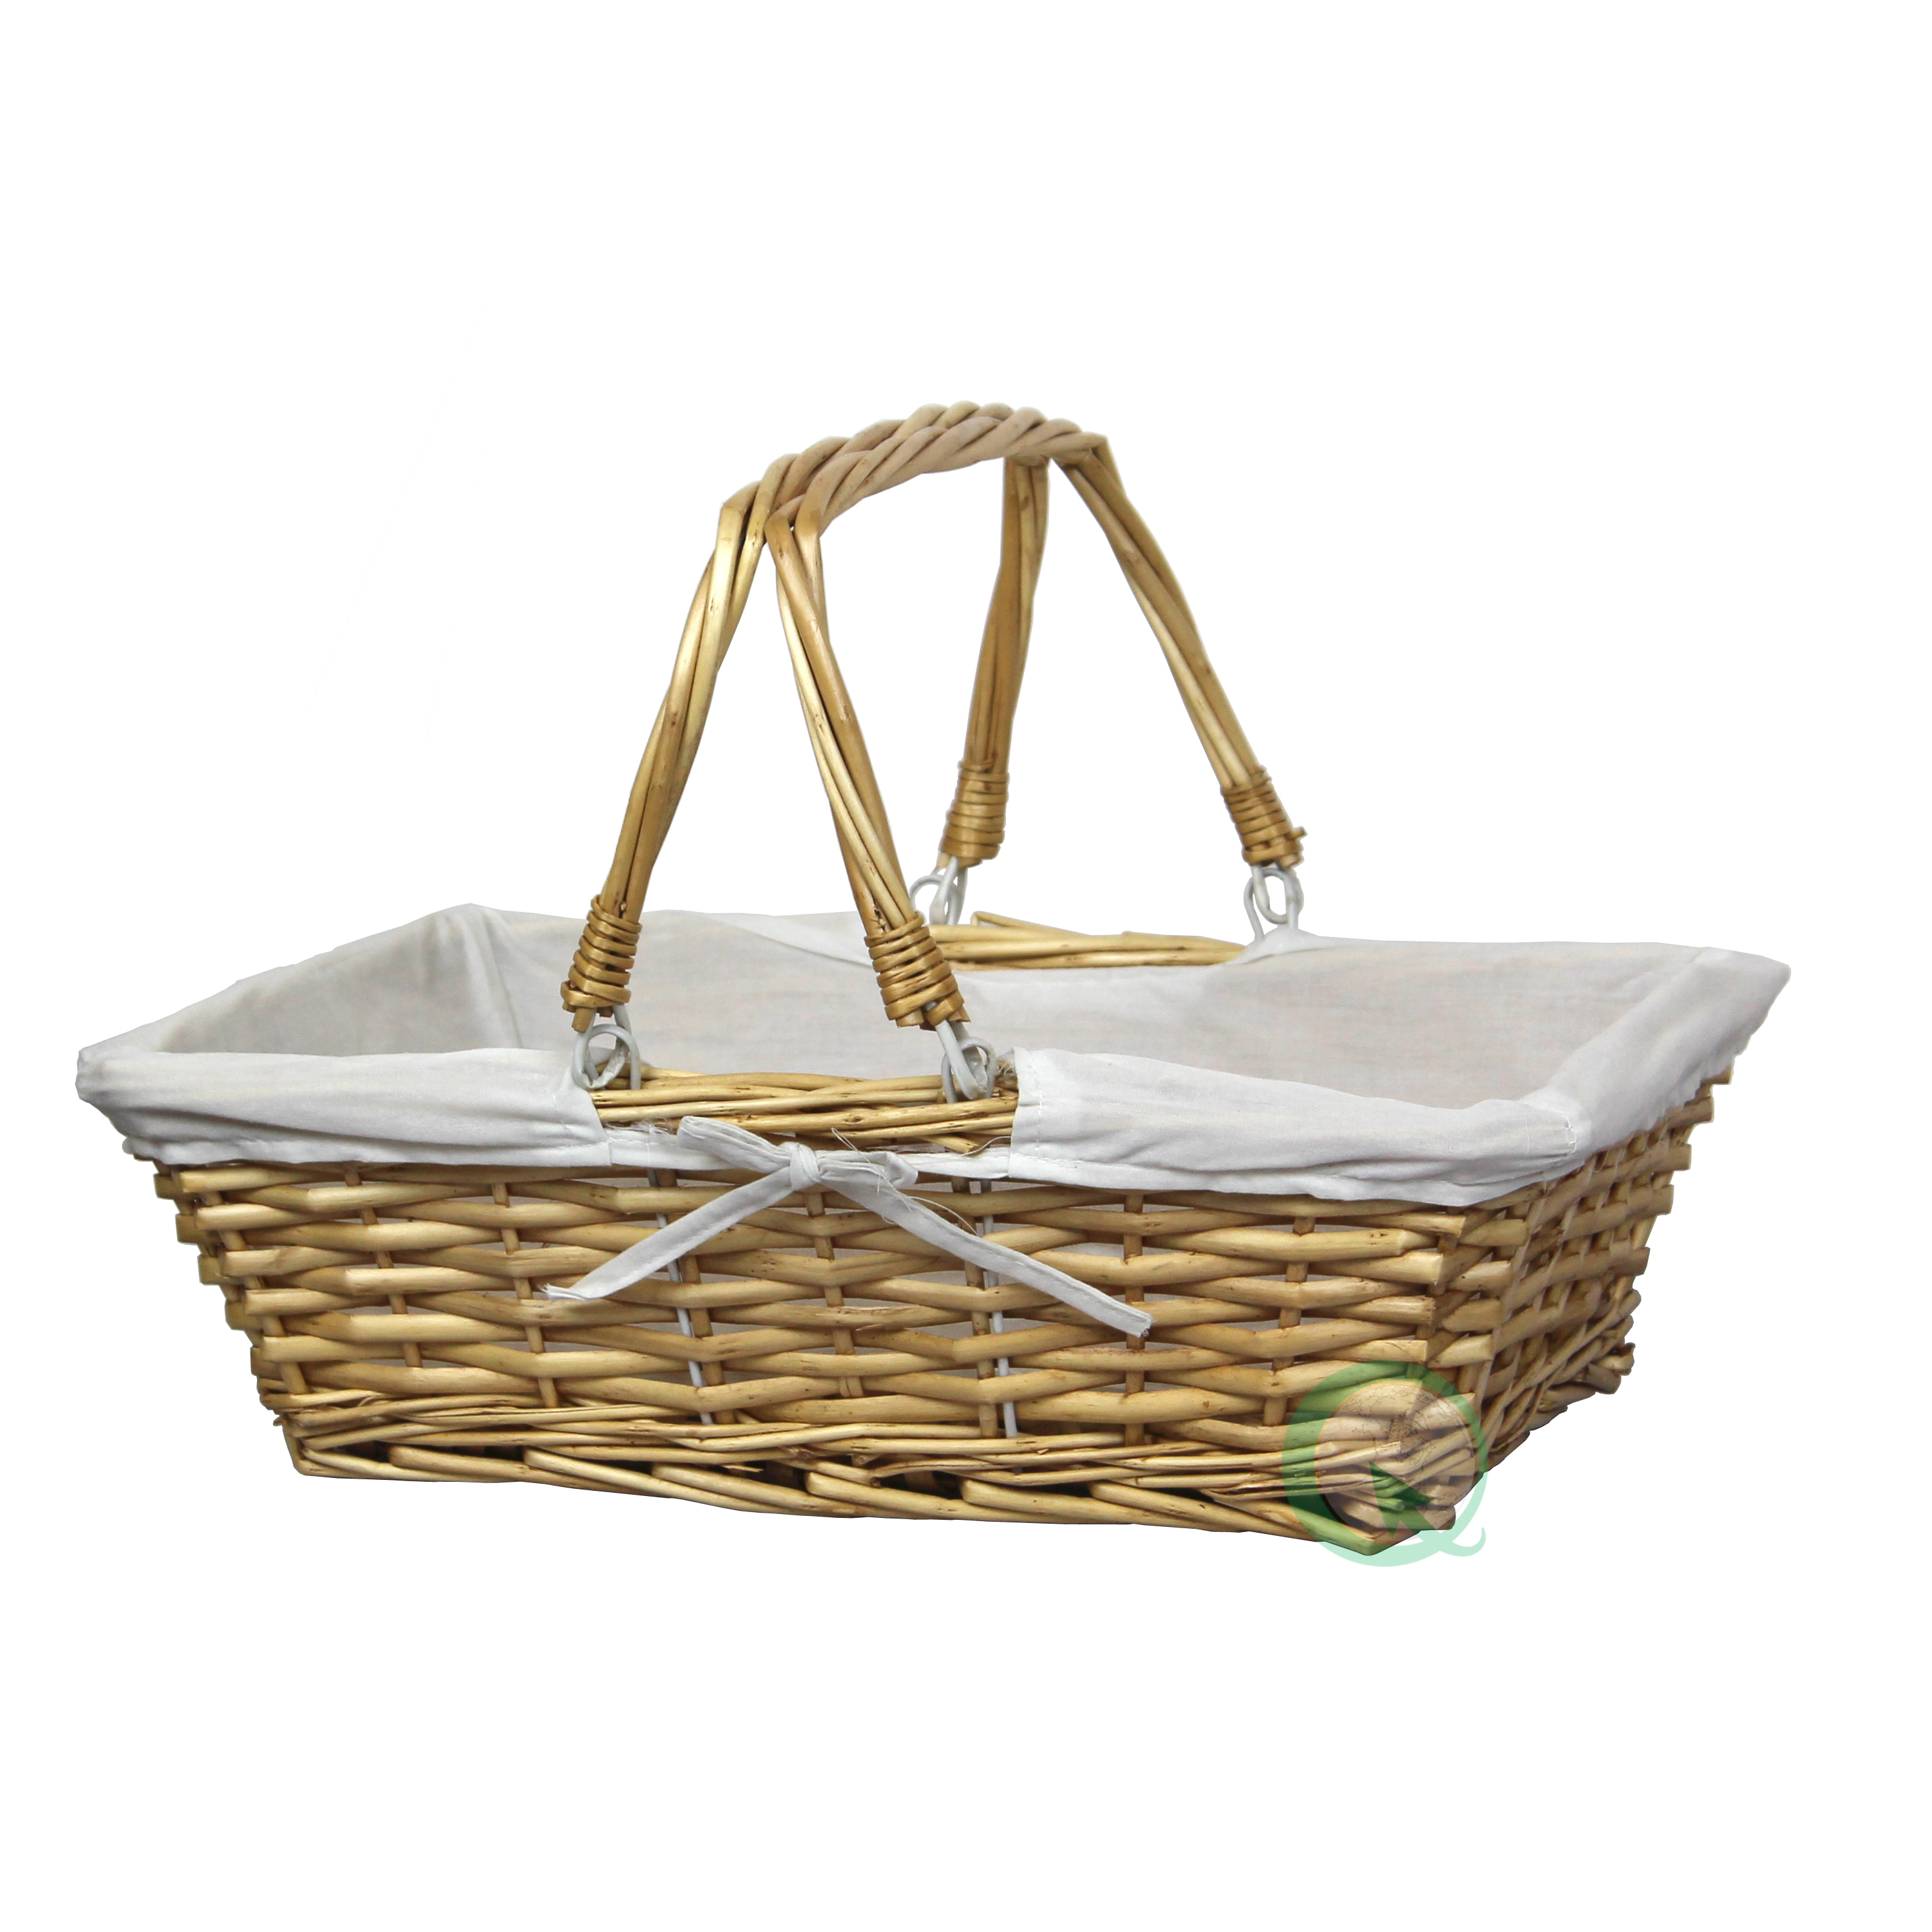 Rectangular Willow Basket With White Fabric Lining